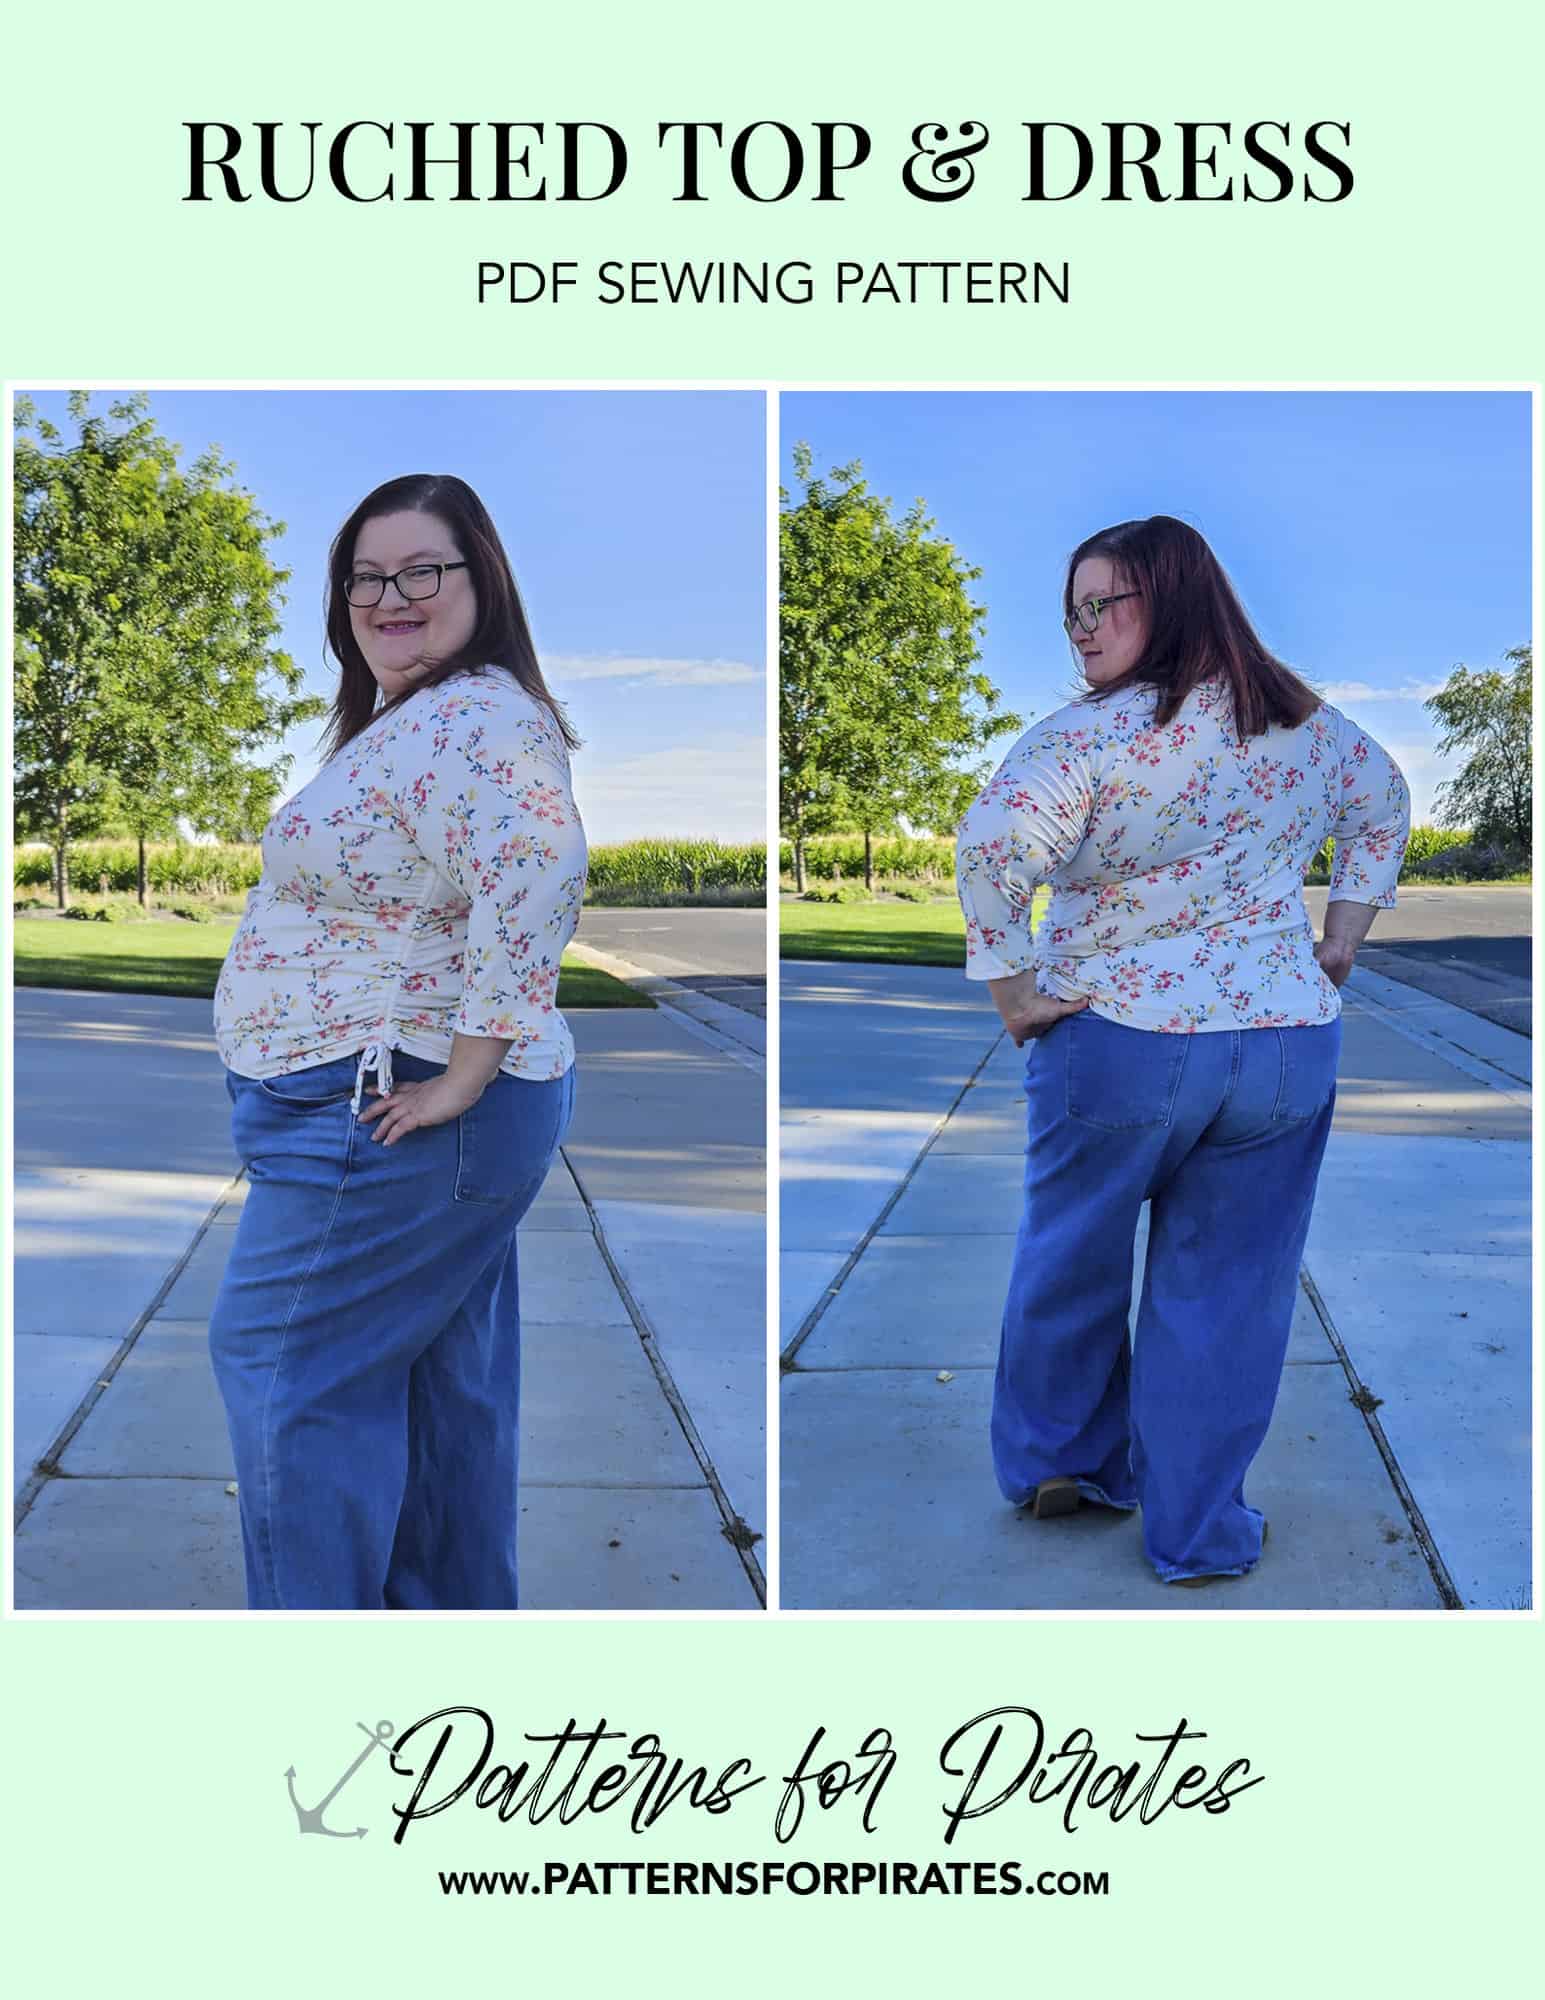 Ruched Top & Dress - Patterns for Pirates